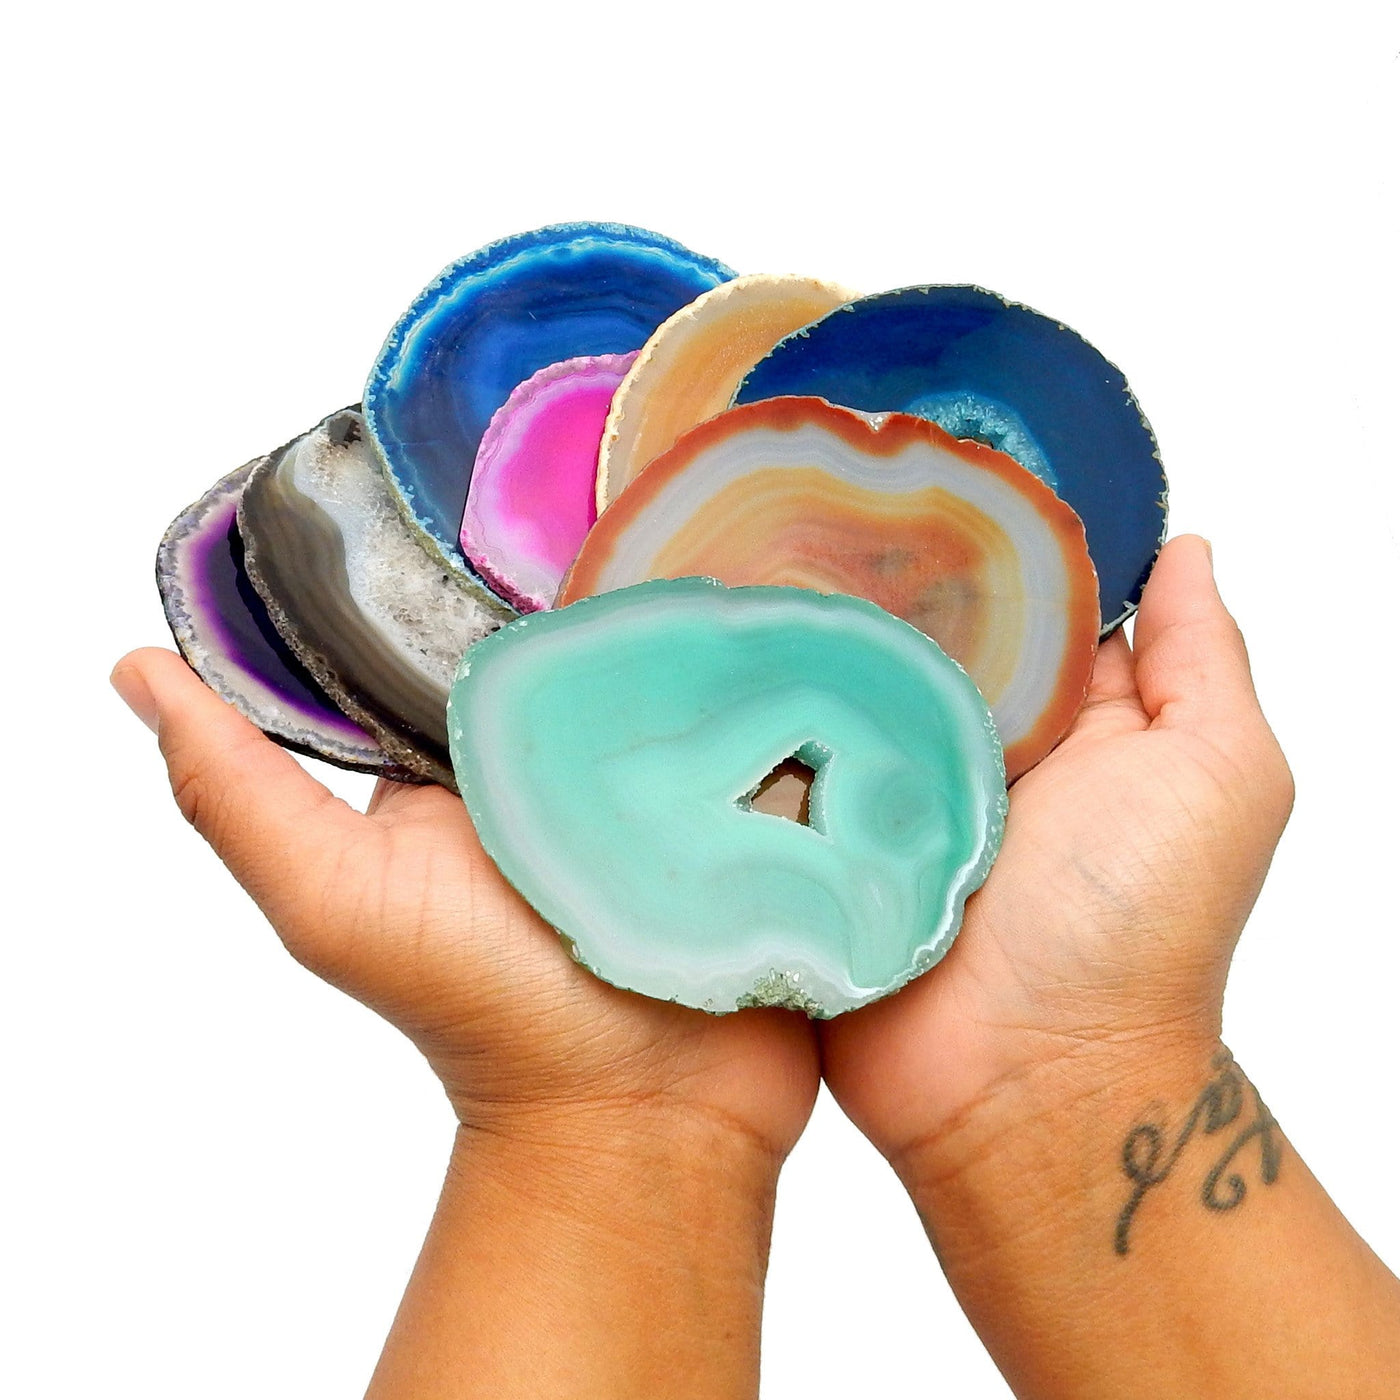 Hands holding Mix set of agates in a verity of colors